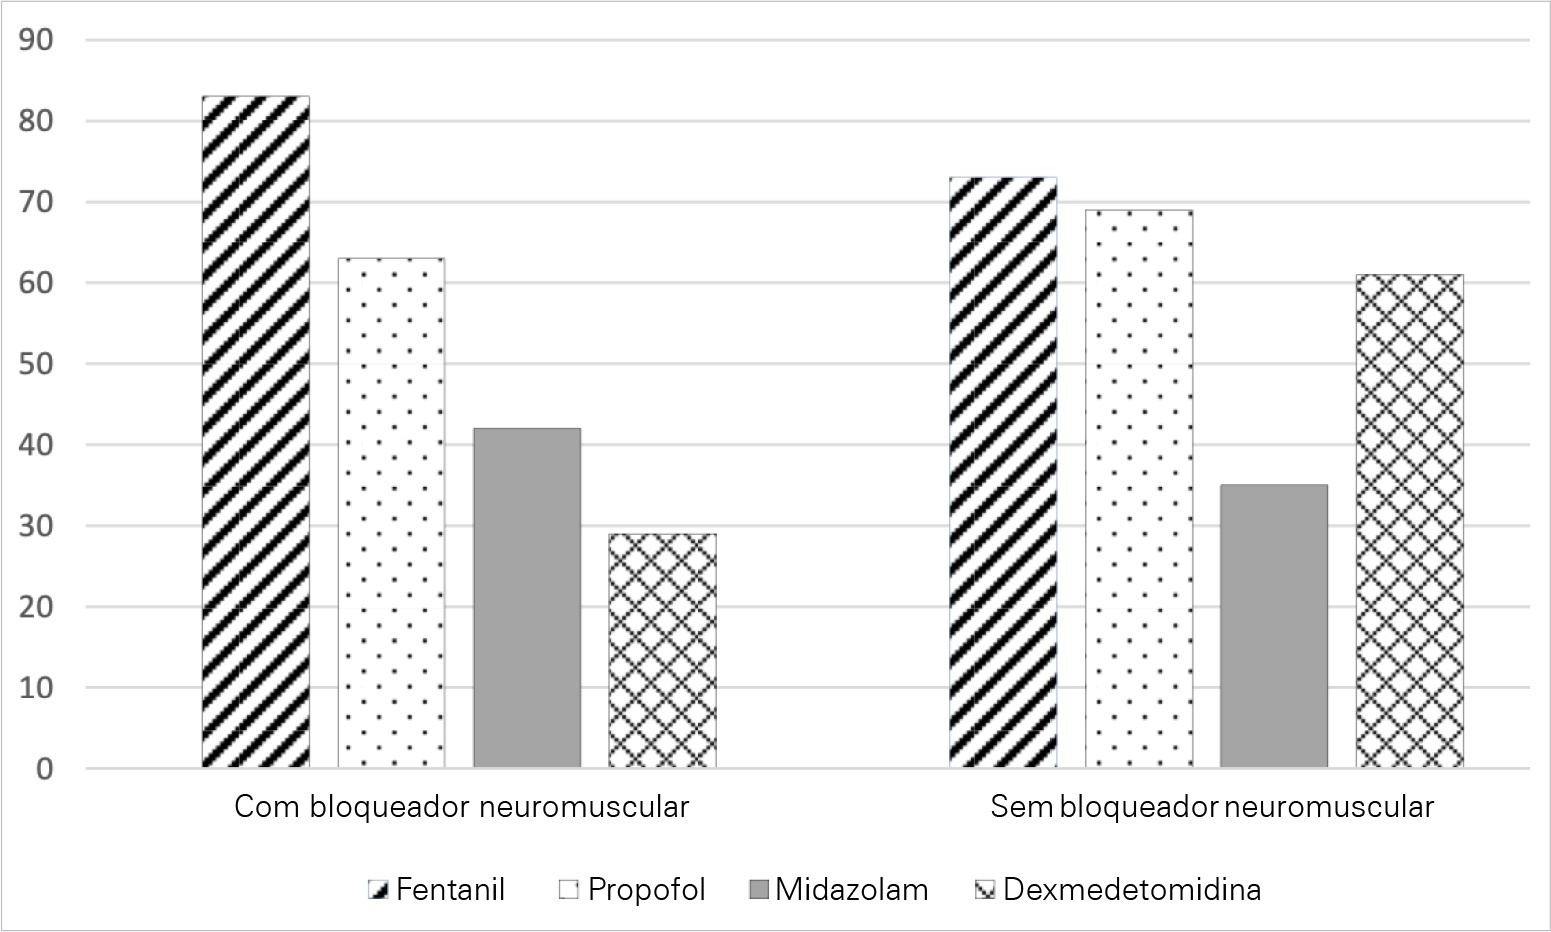 Perceptions and practices regarding light sedation in mechanically ventilated patients: a survey on the attitudes of Brazilian critical care physicians